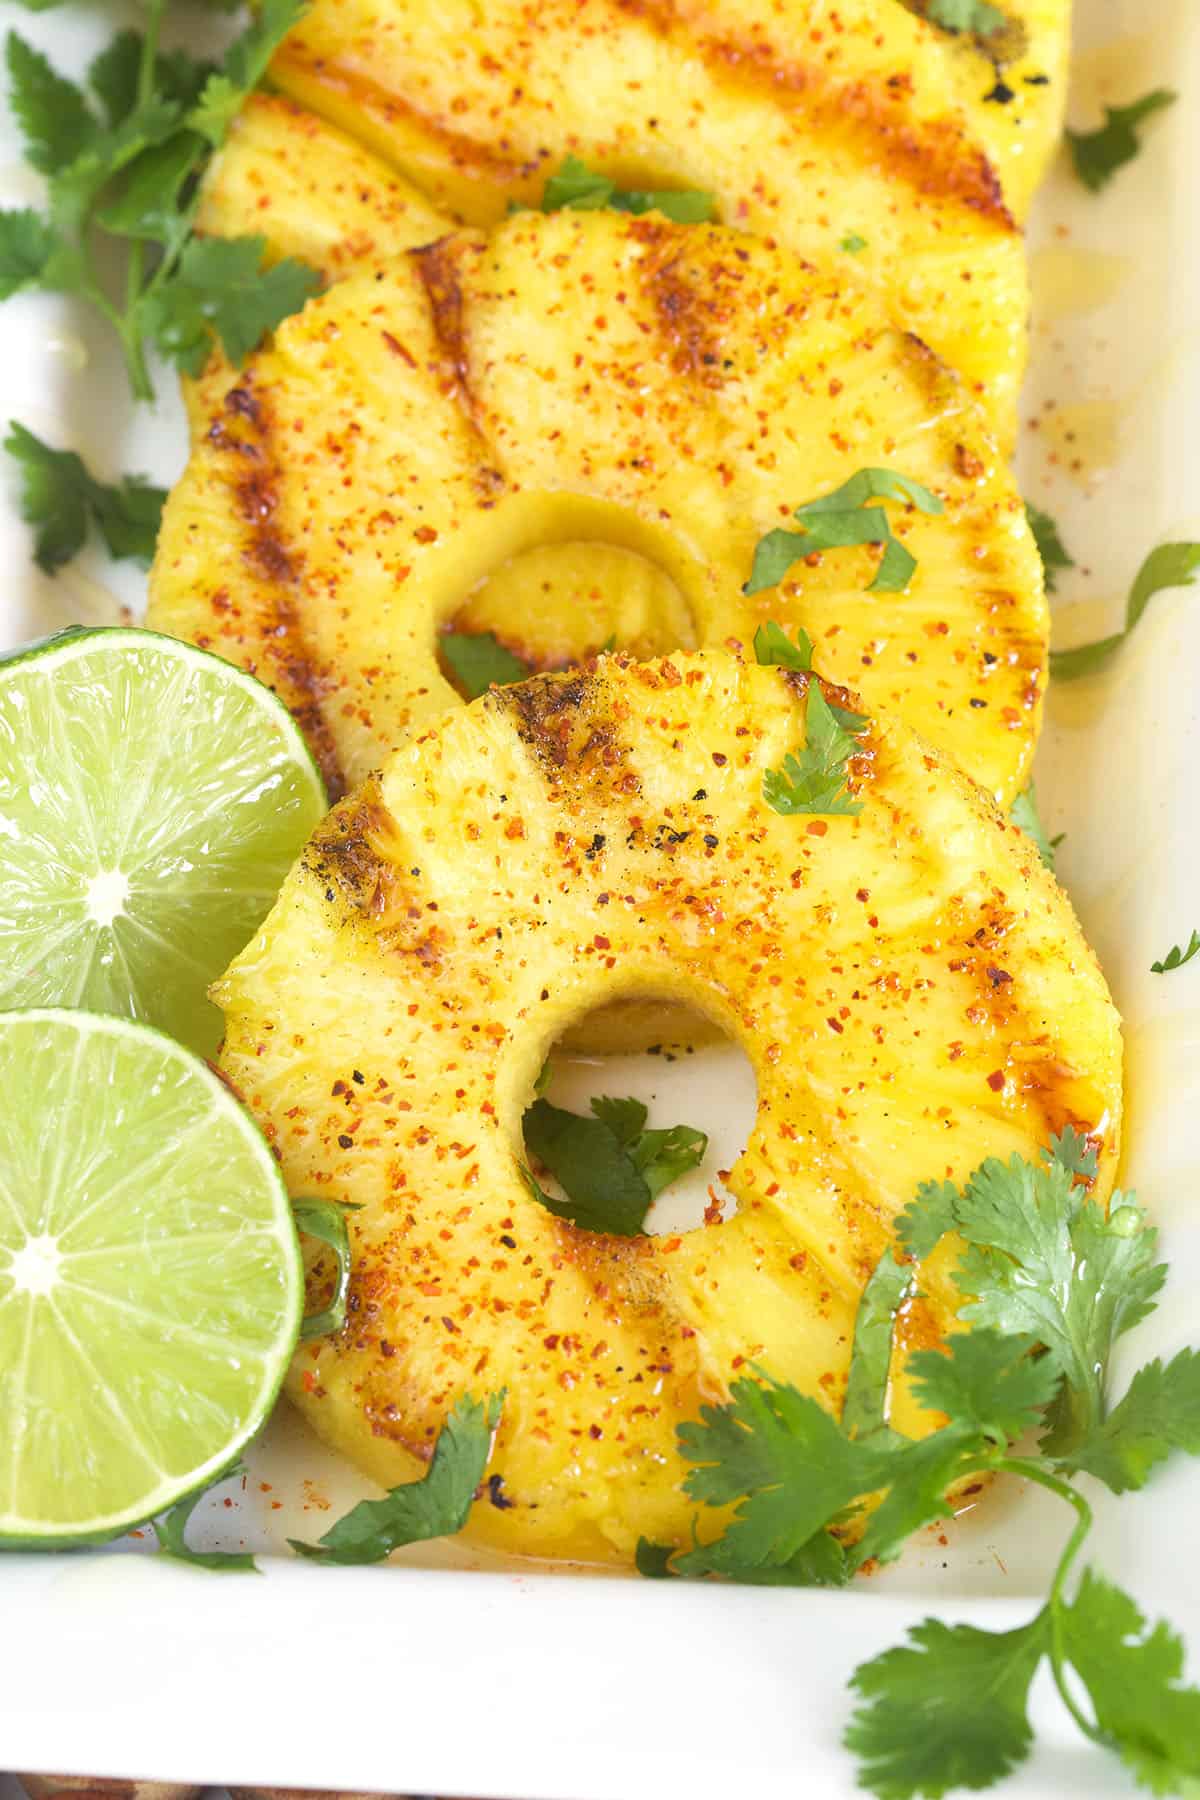 Three slices of grilled pineapple with cilantro sprigs and two lime slices.